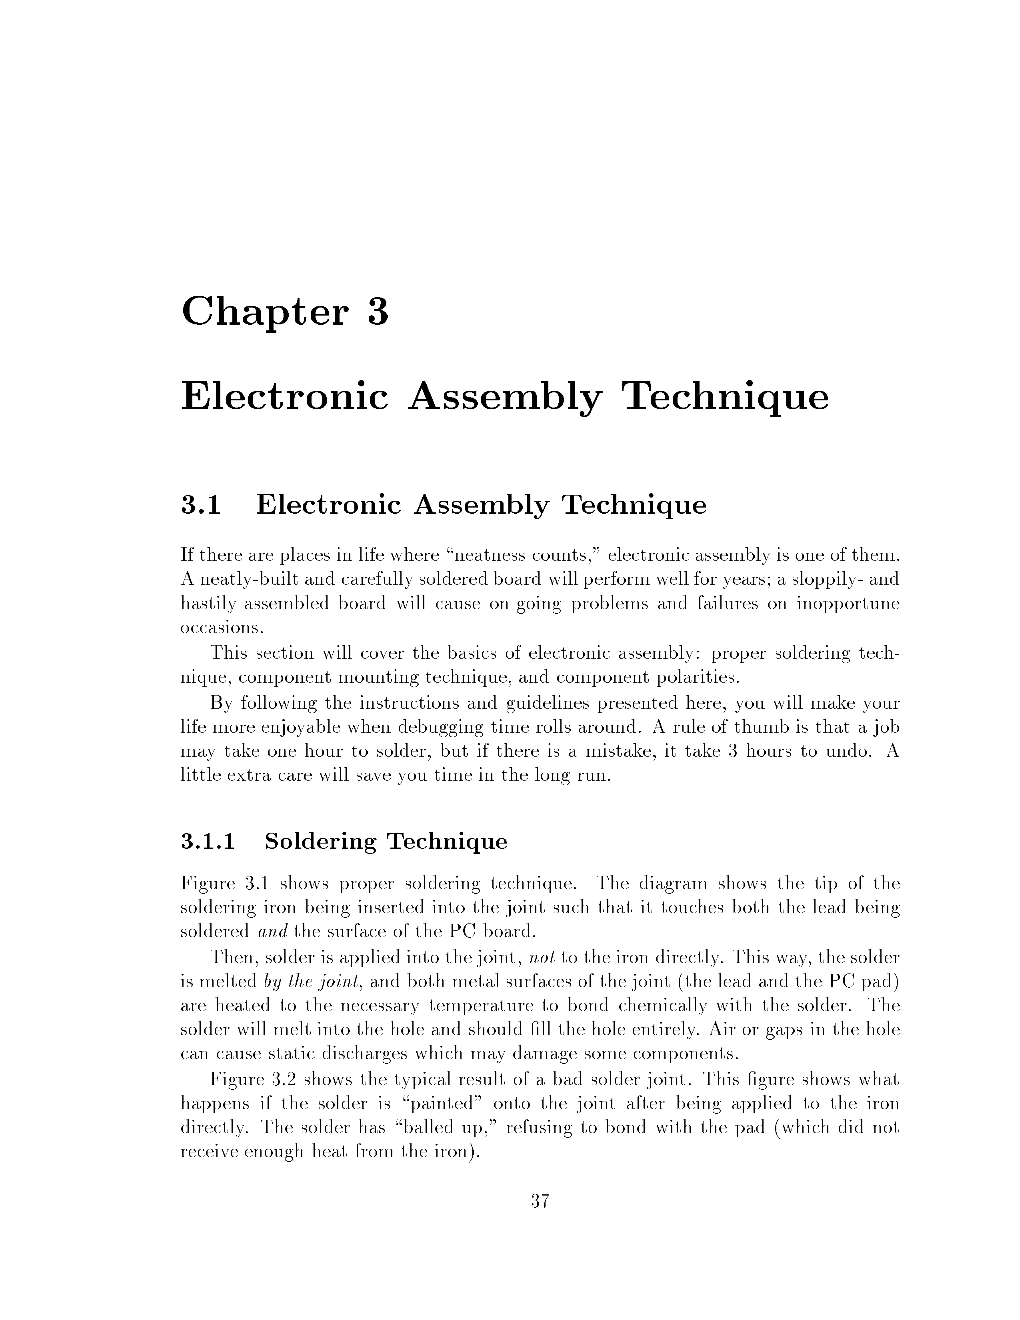 Chapter 3 Electronic Assembly Technique